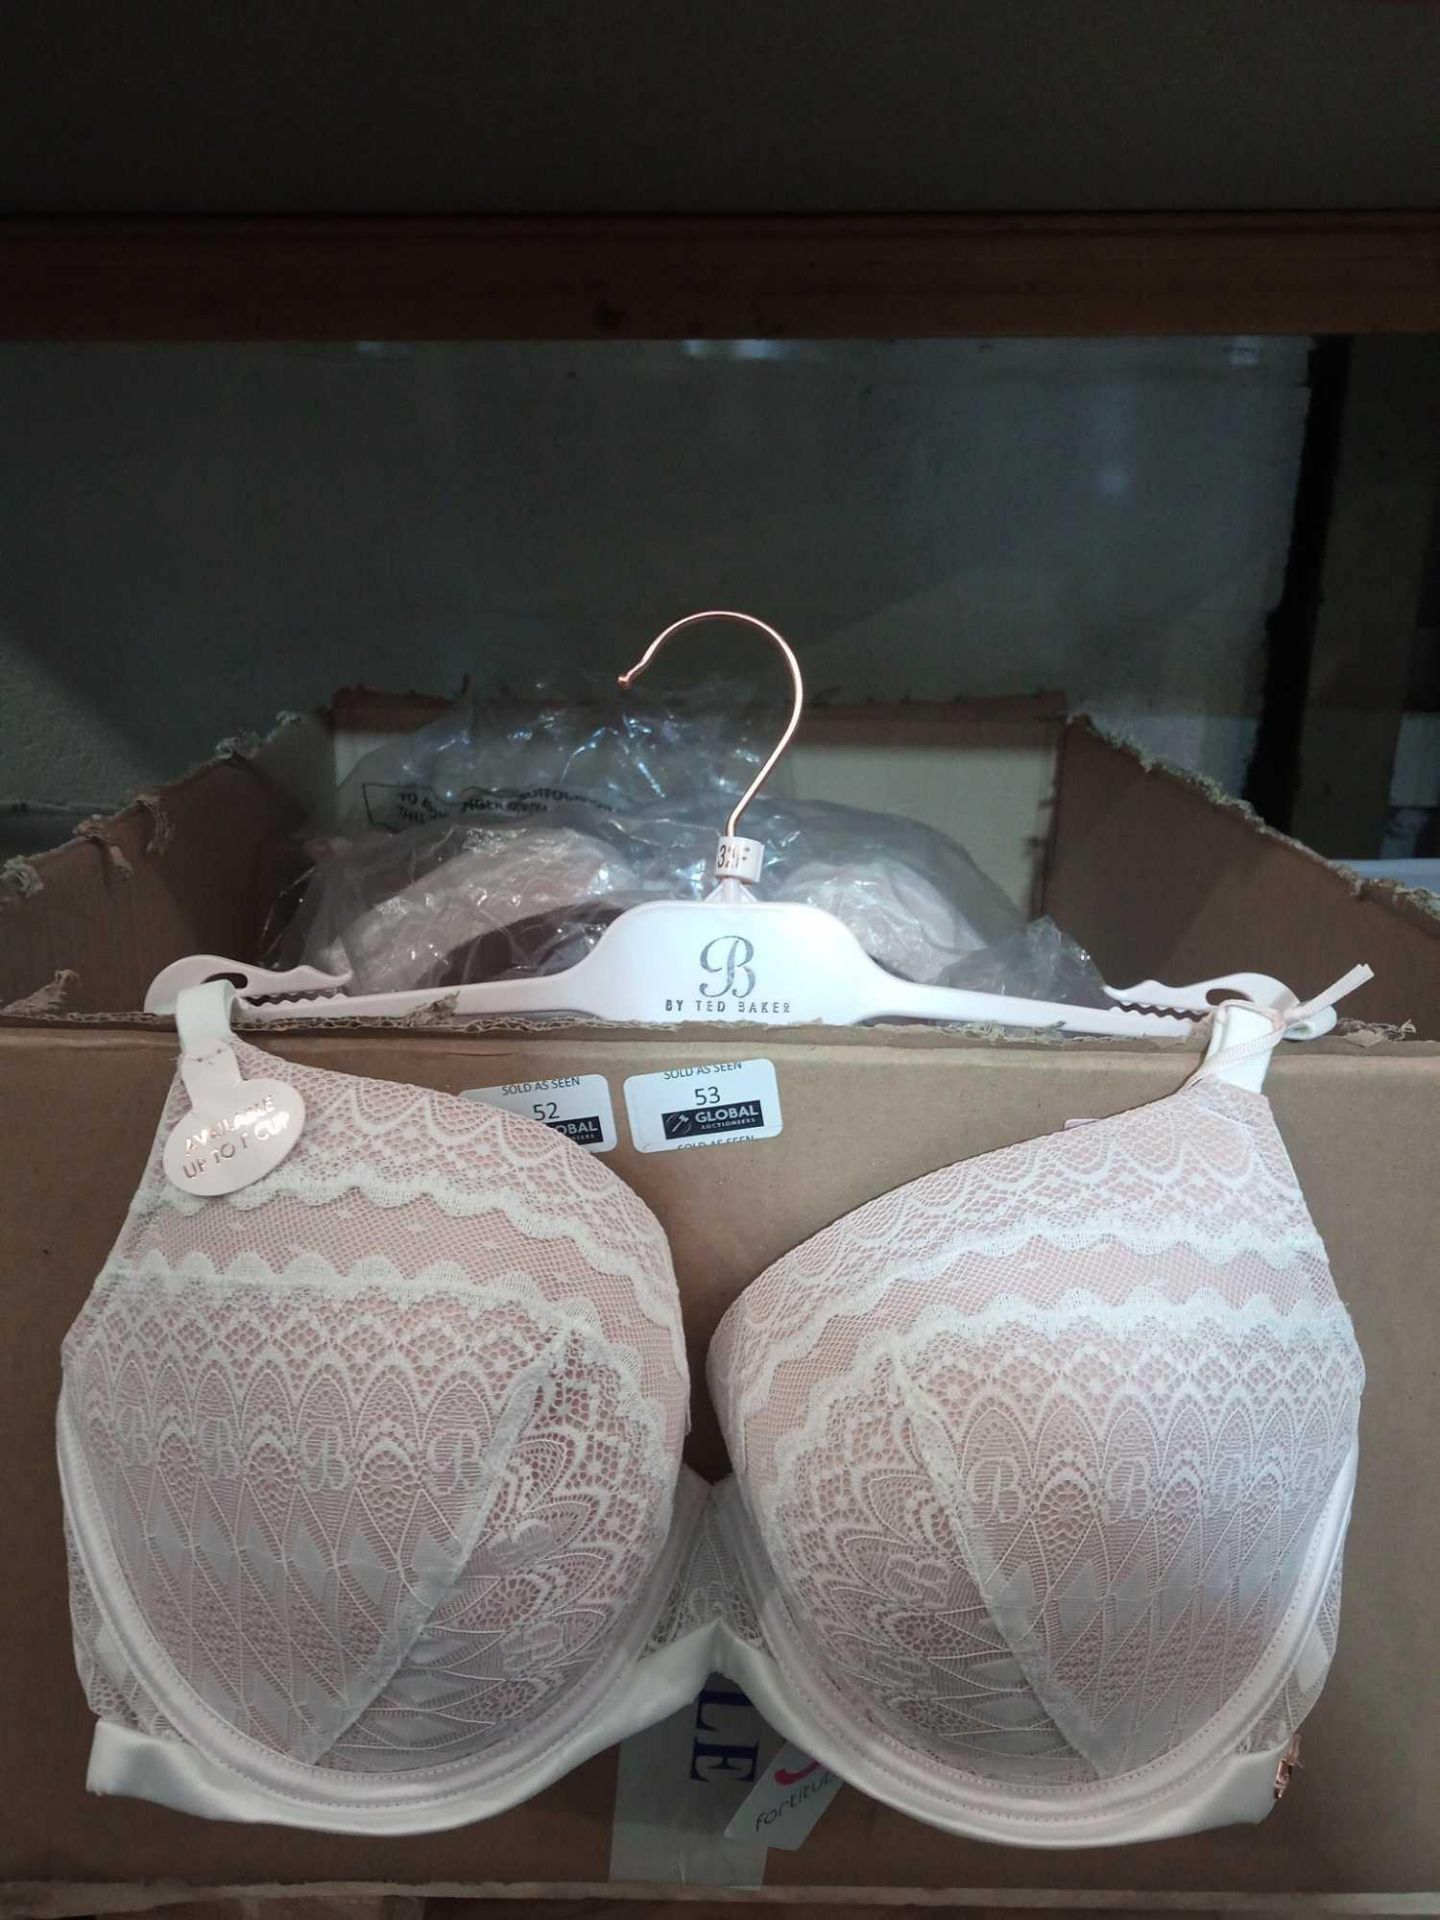 RRP £30 Each Ted Baker Signature Lace Plunge Bra In Ivory